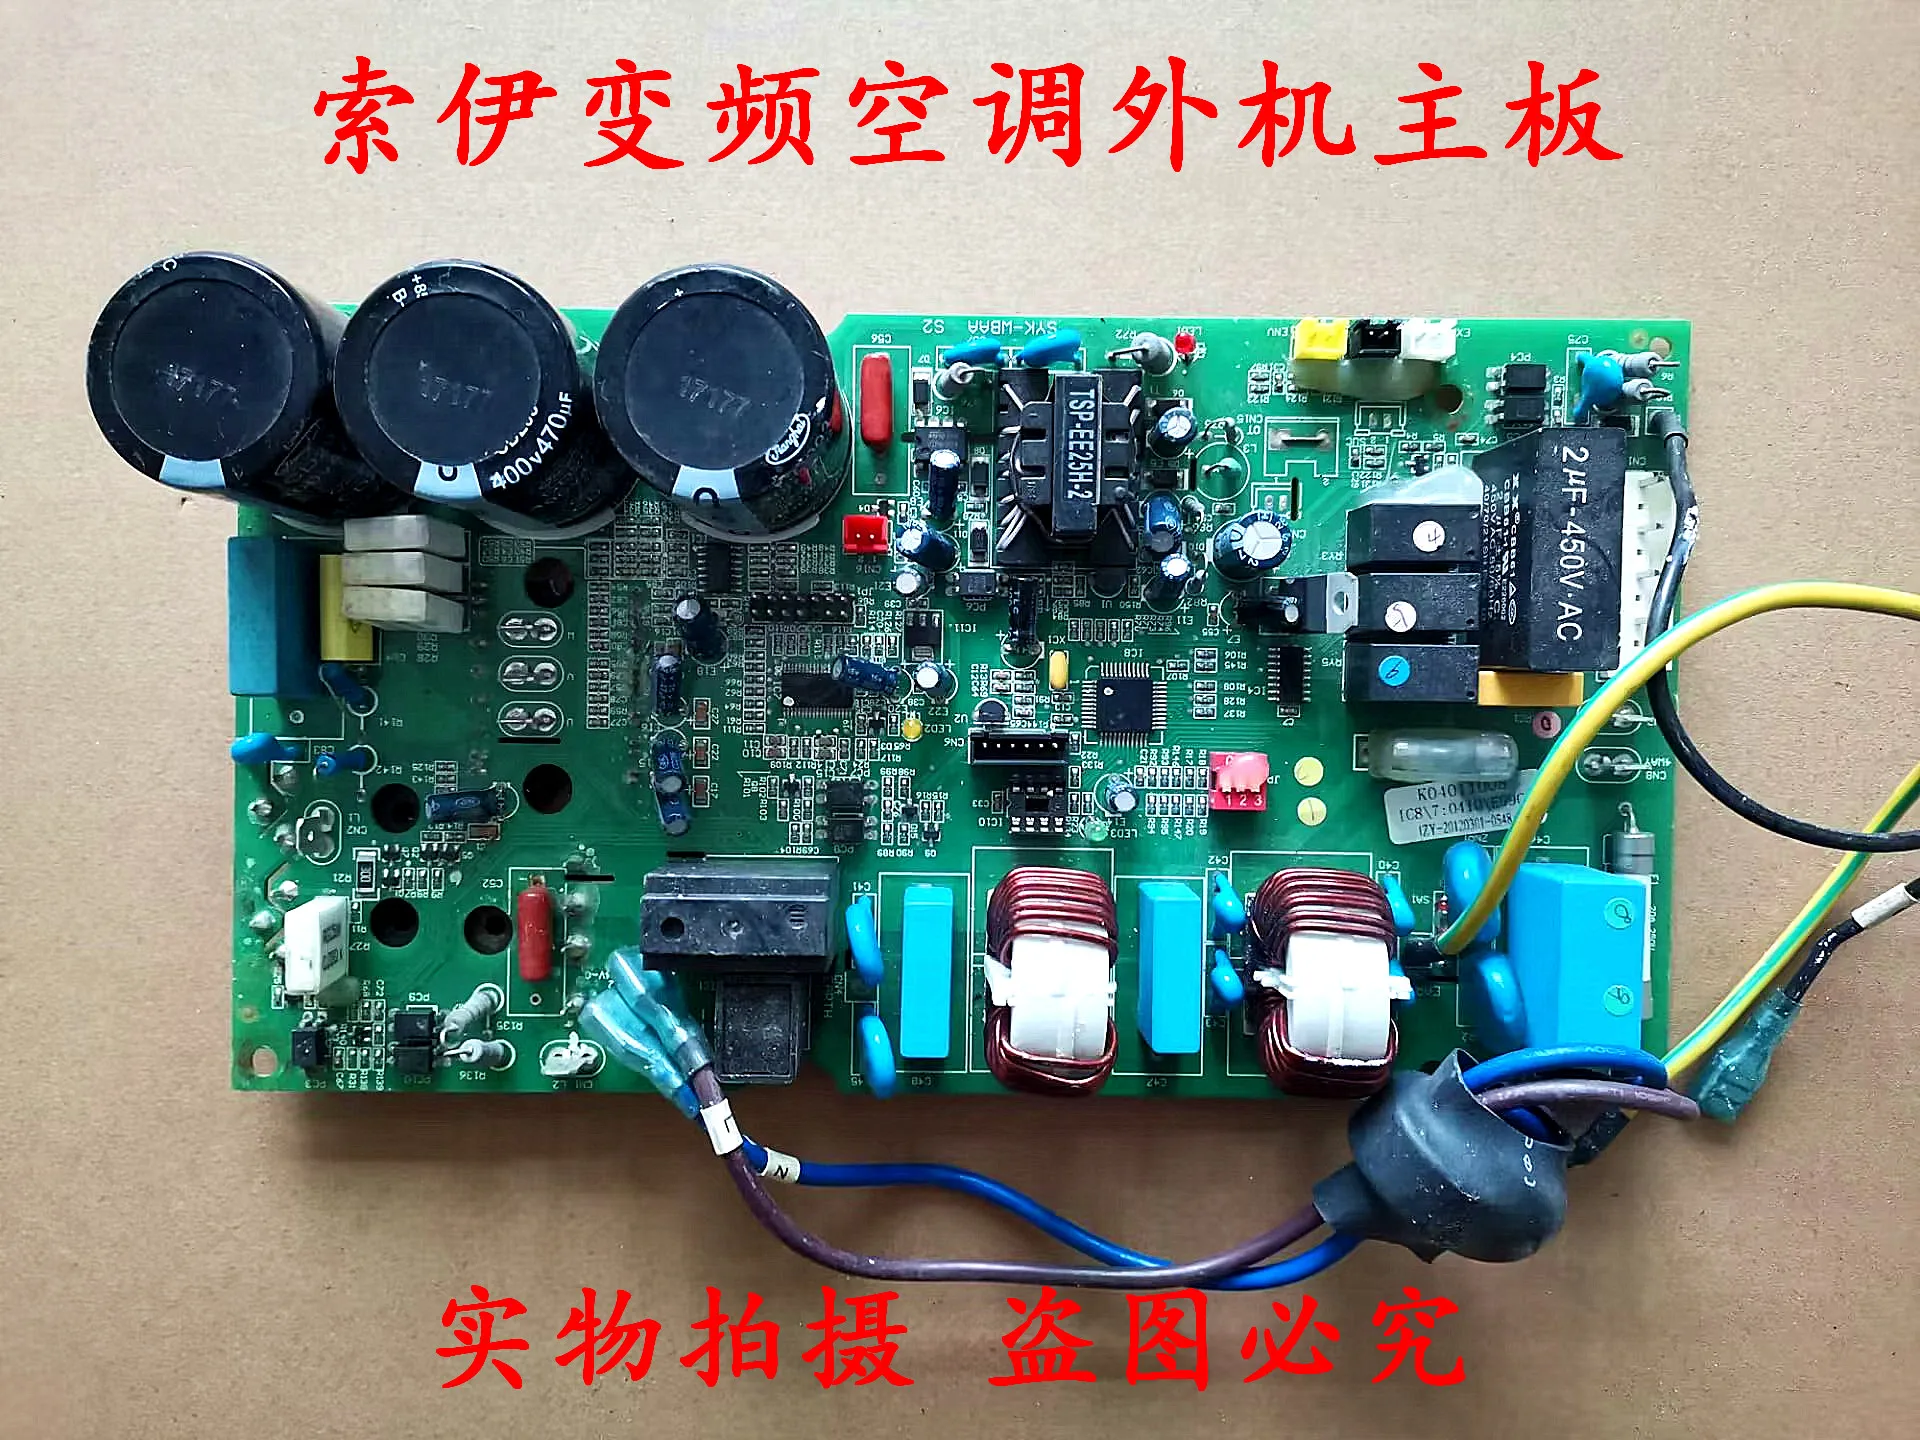 

Applicable to the external unit motherboard KFRd-35W/BP (XY) of the Soy variable frequency air conditioner